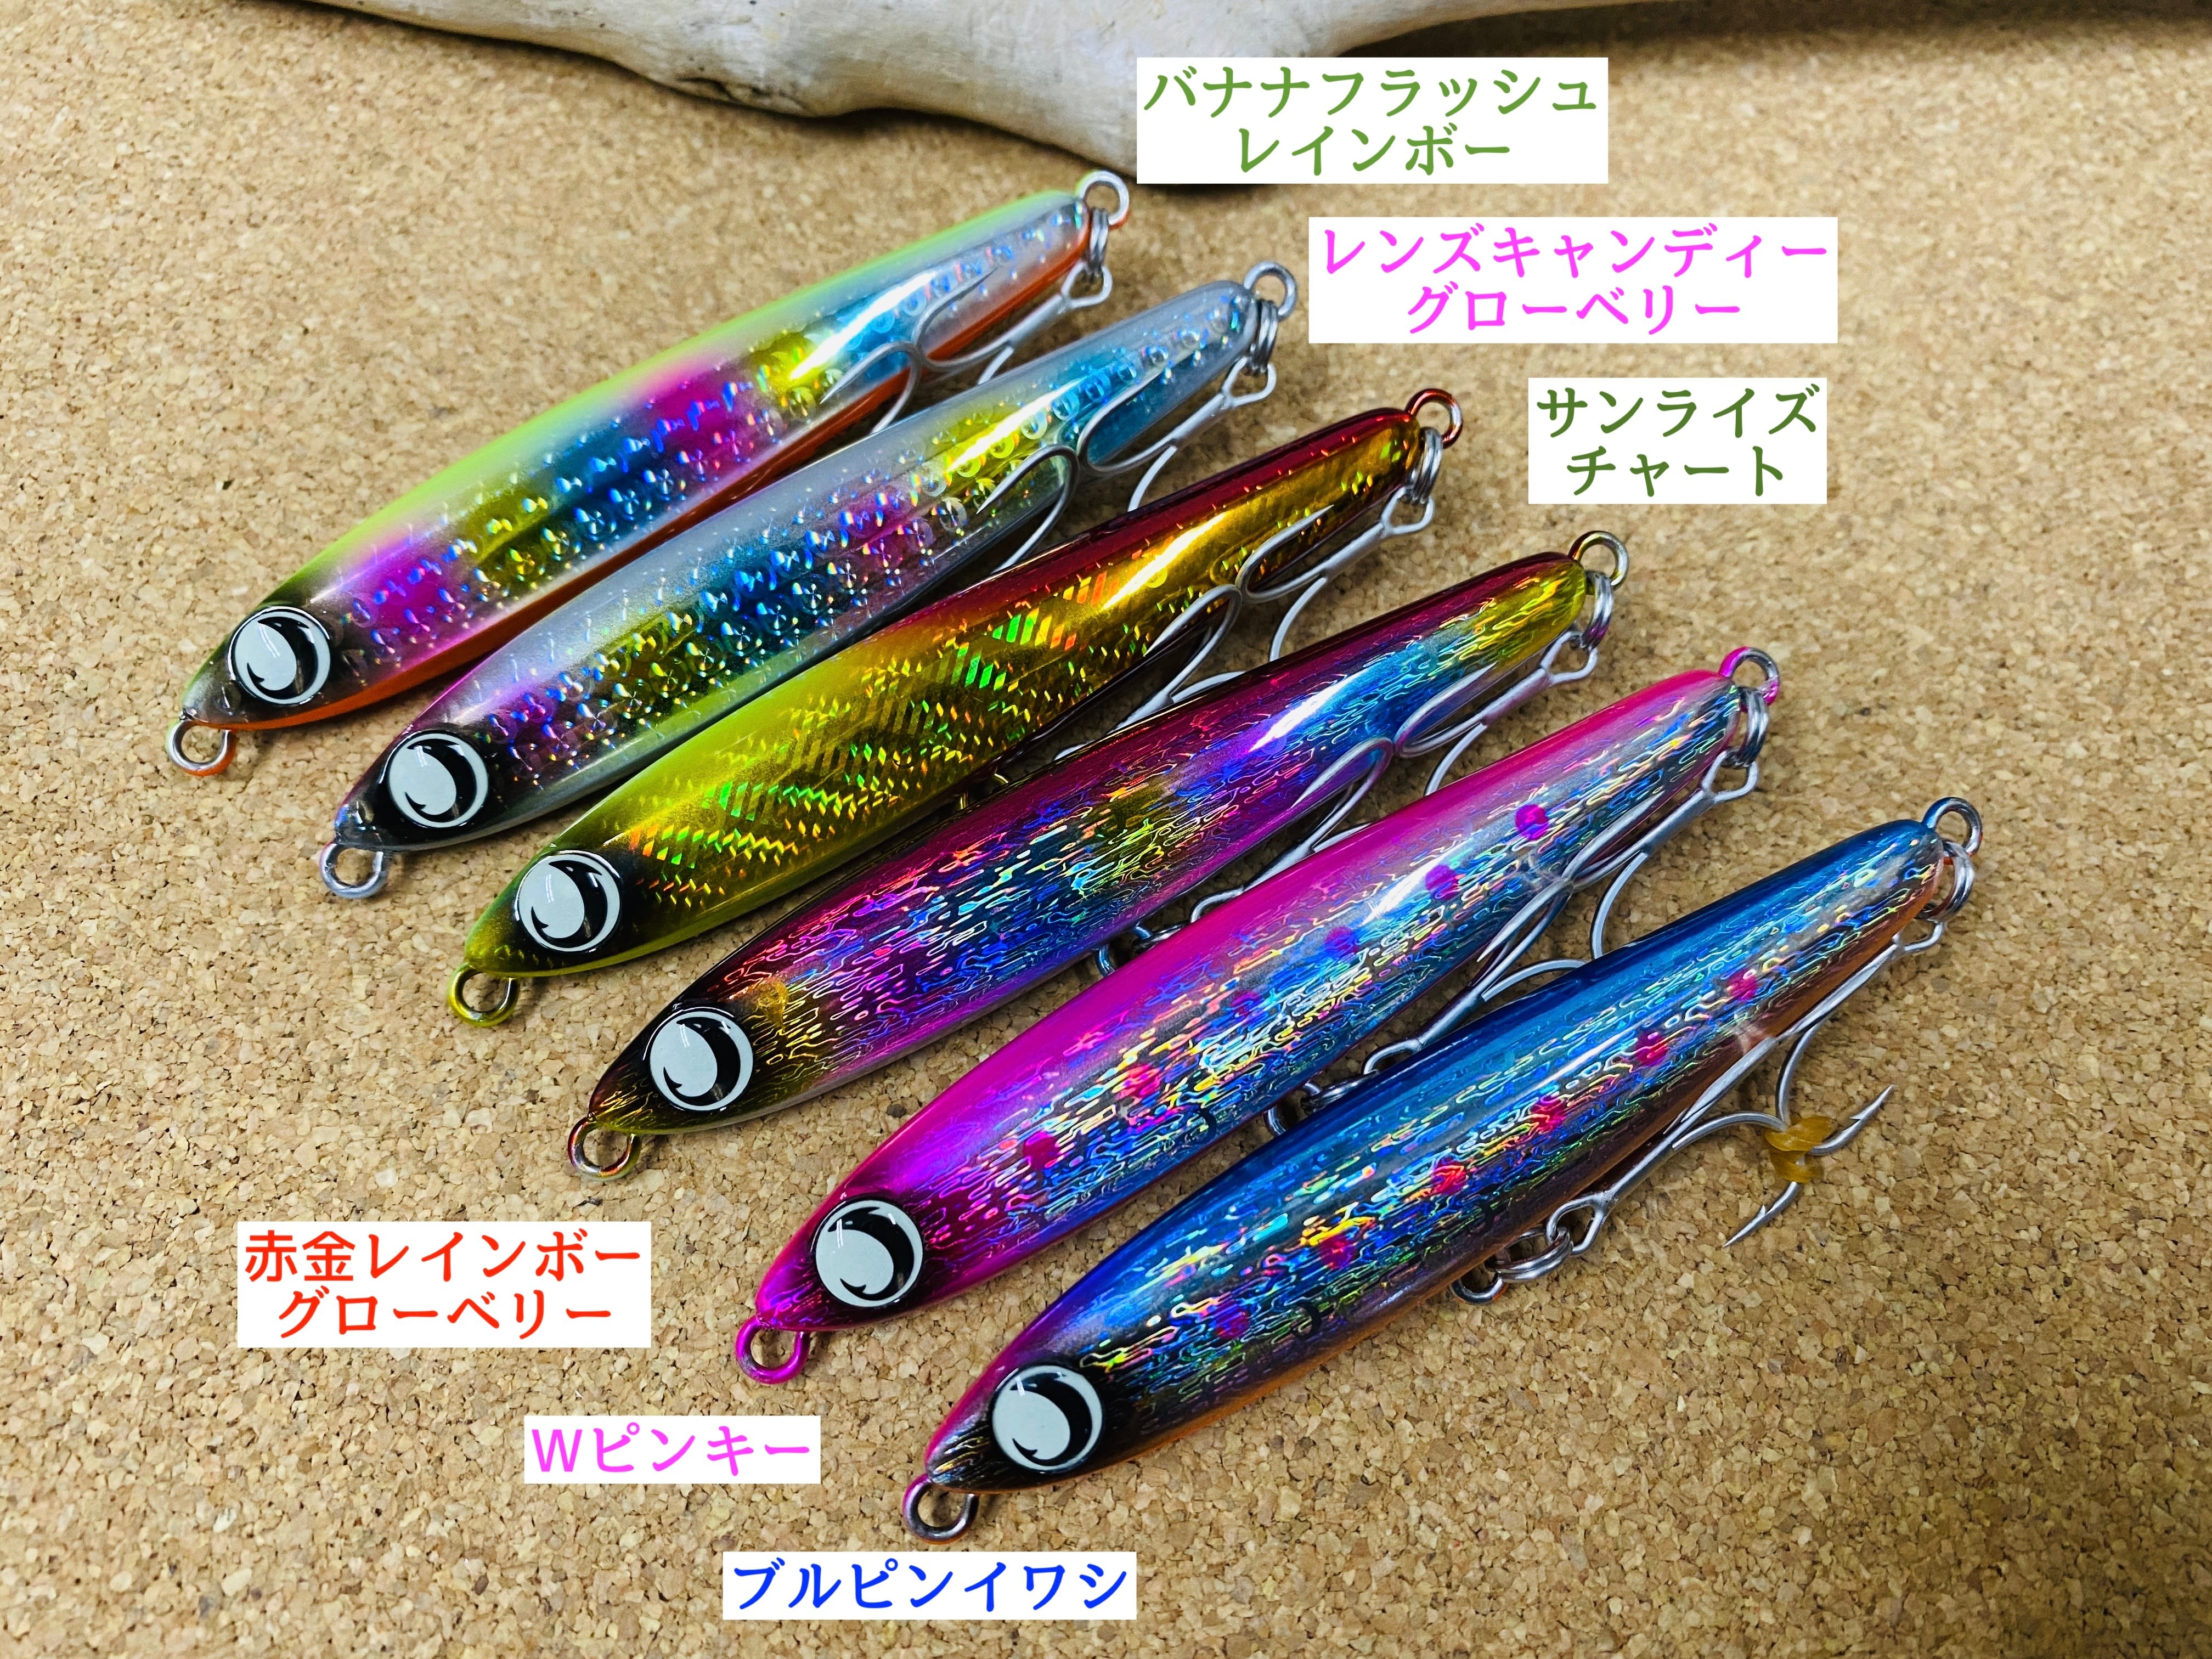 JUMPRIZE ぶっ飛び君95S ラトルSP | Fishing Tackle BLUE MARLIN